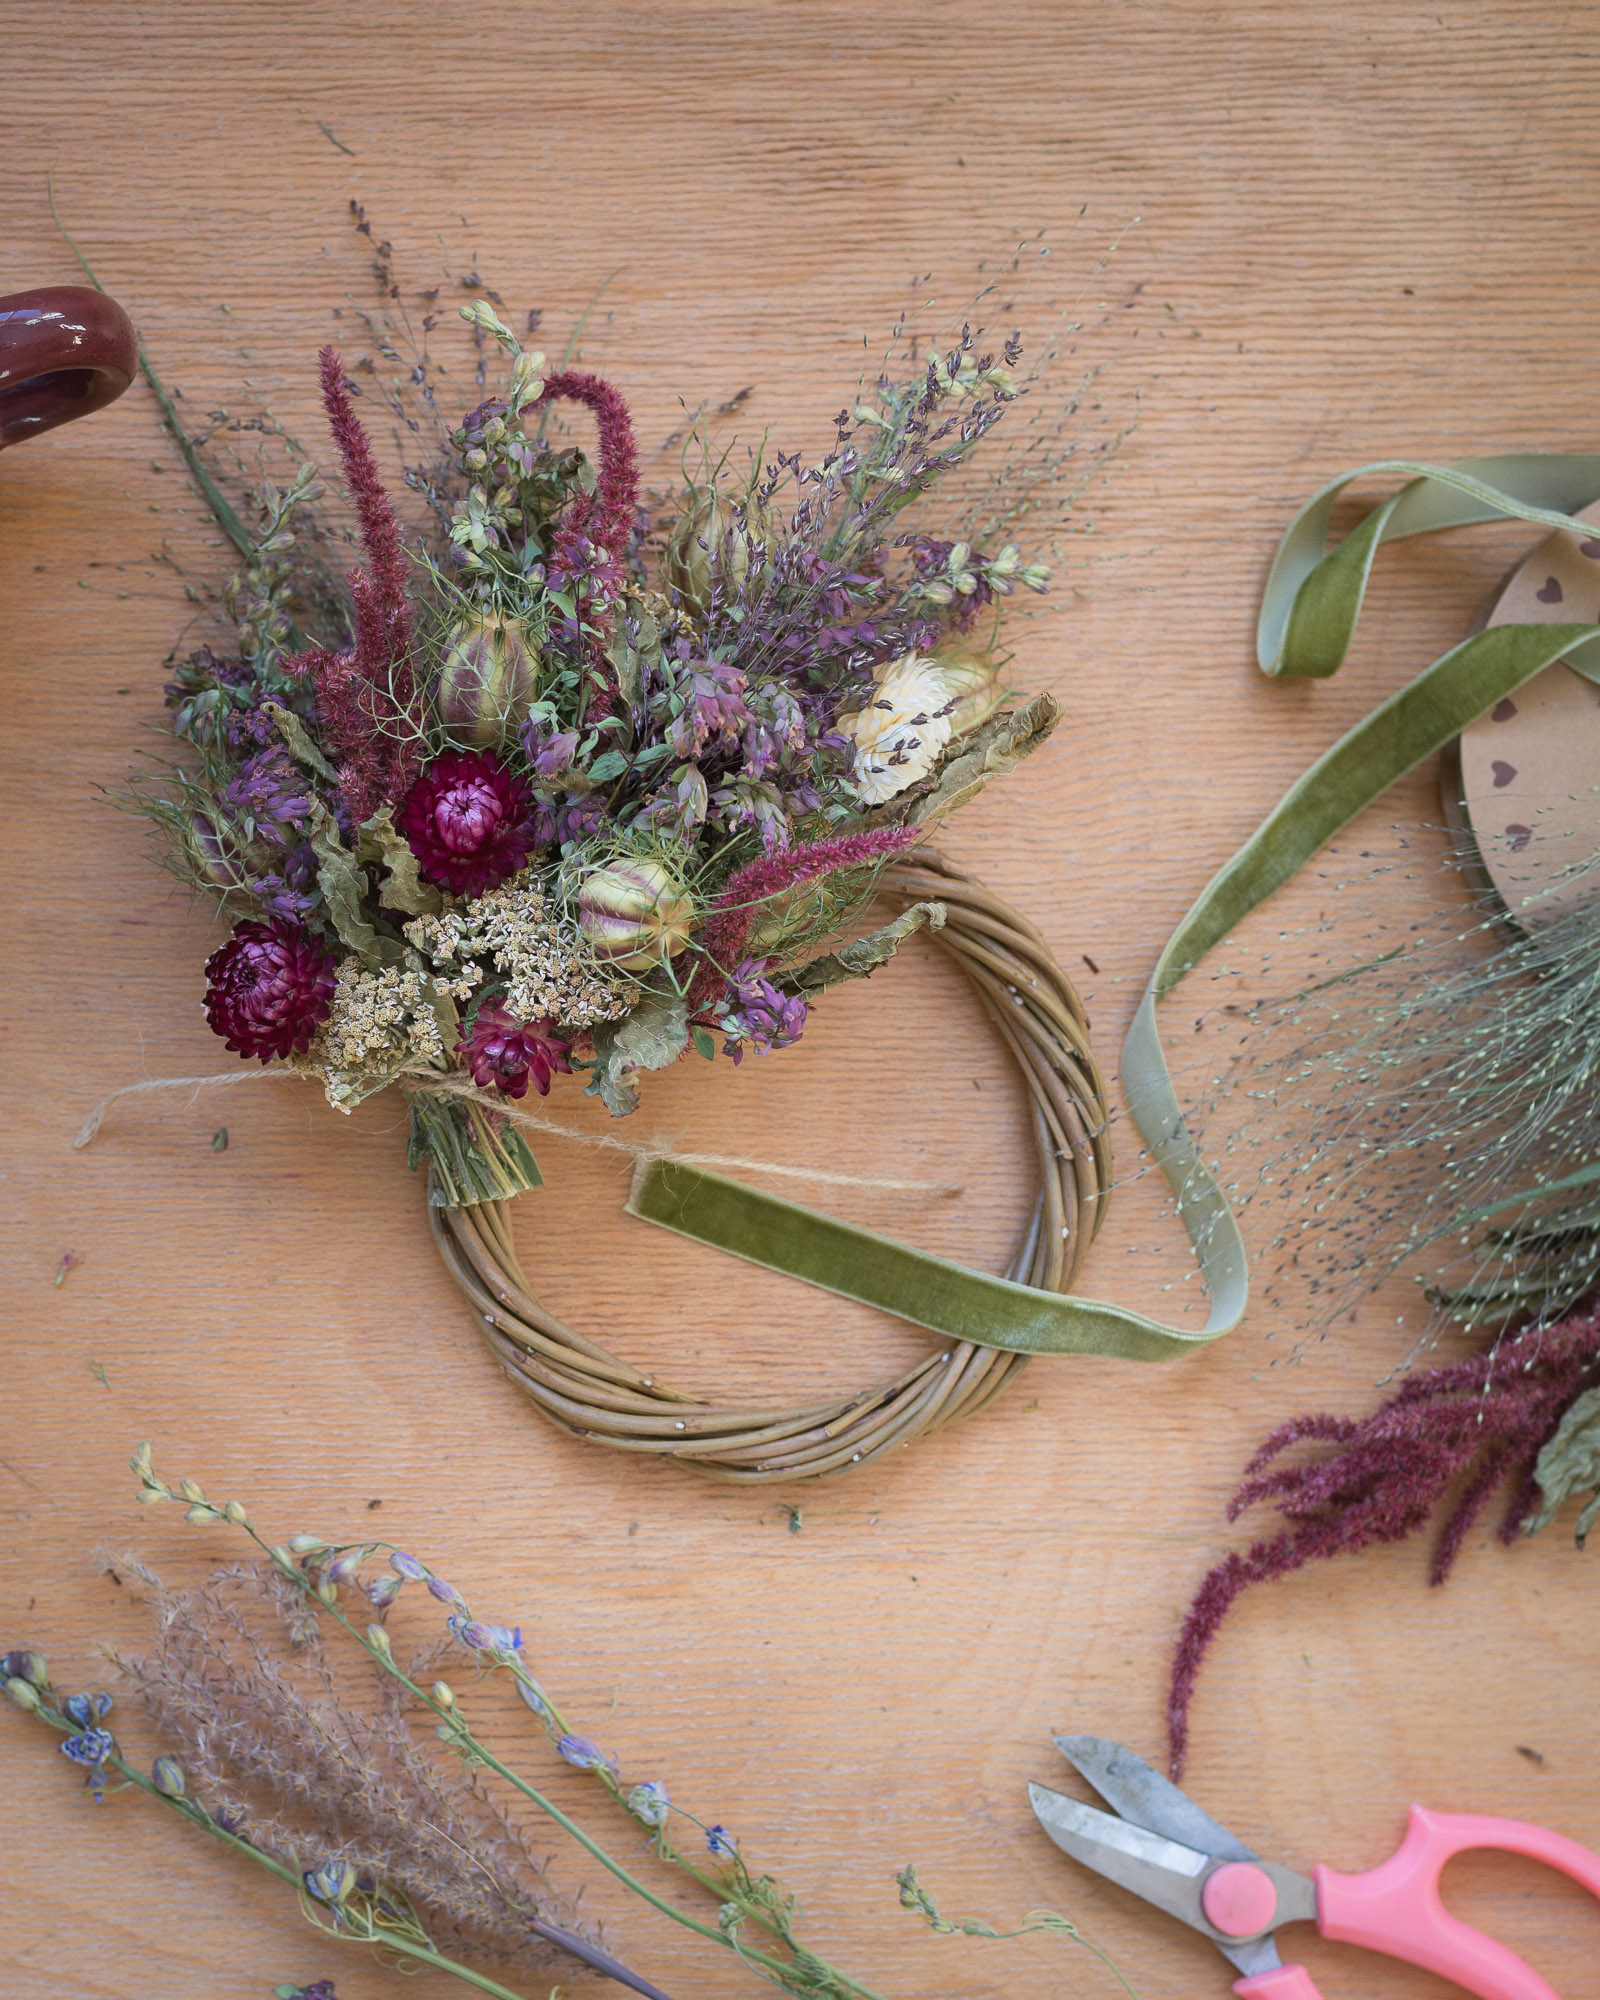 Make Your Own Dried Flower Wreath